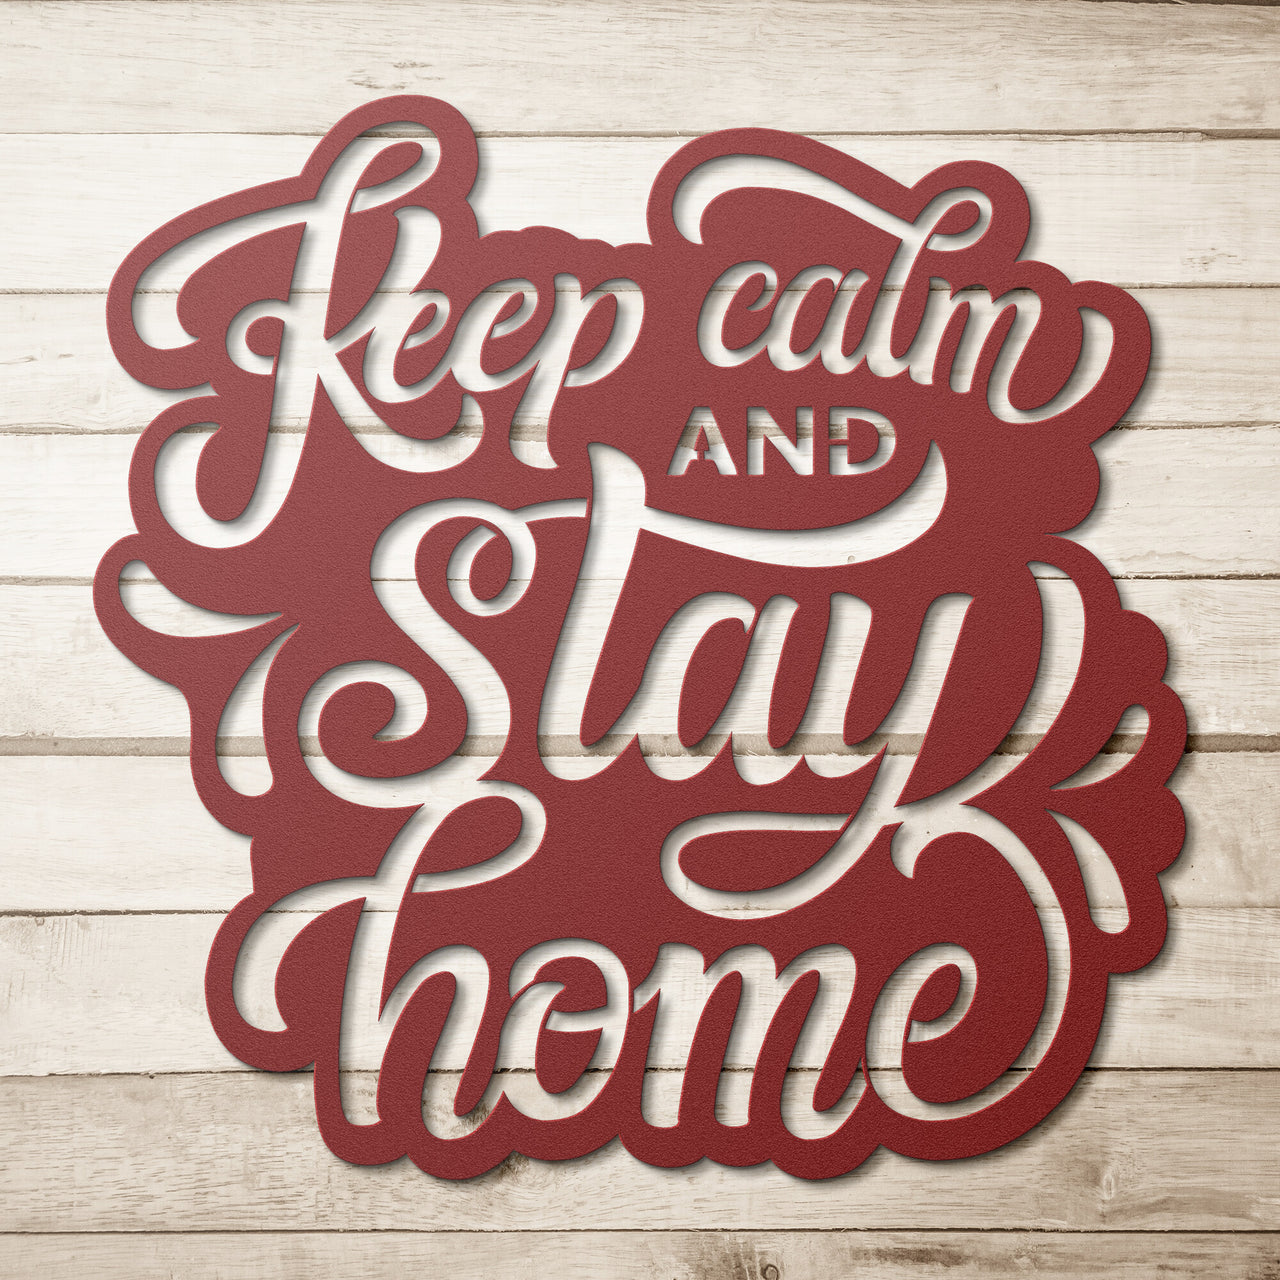 Keep Calm and Stay Home_ Steel Wall Art